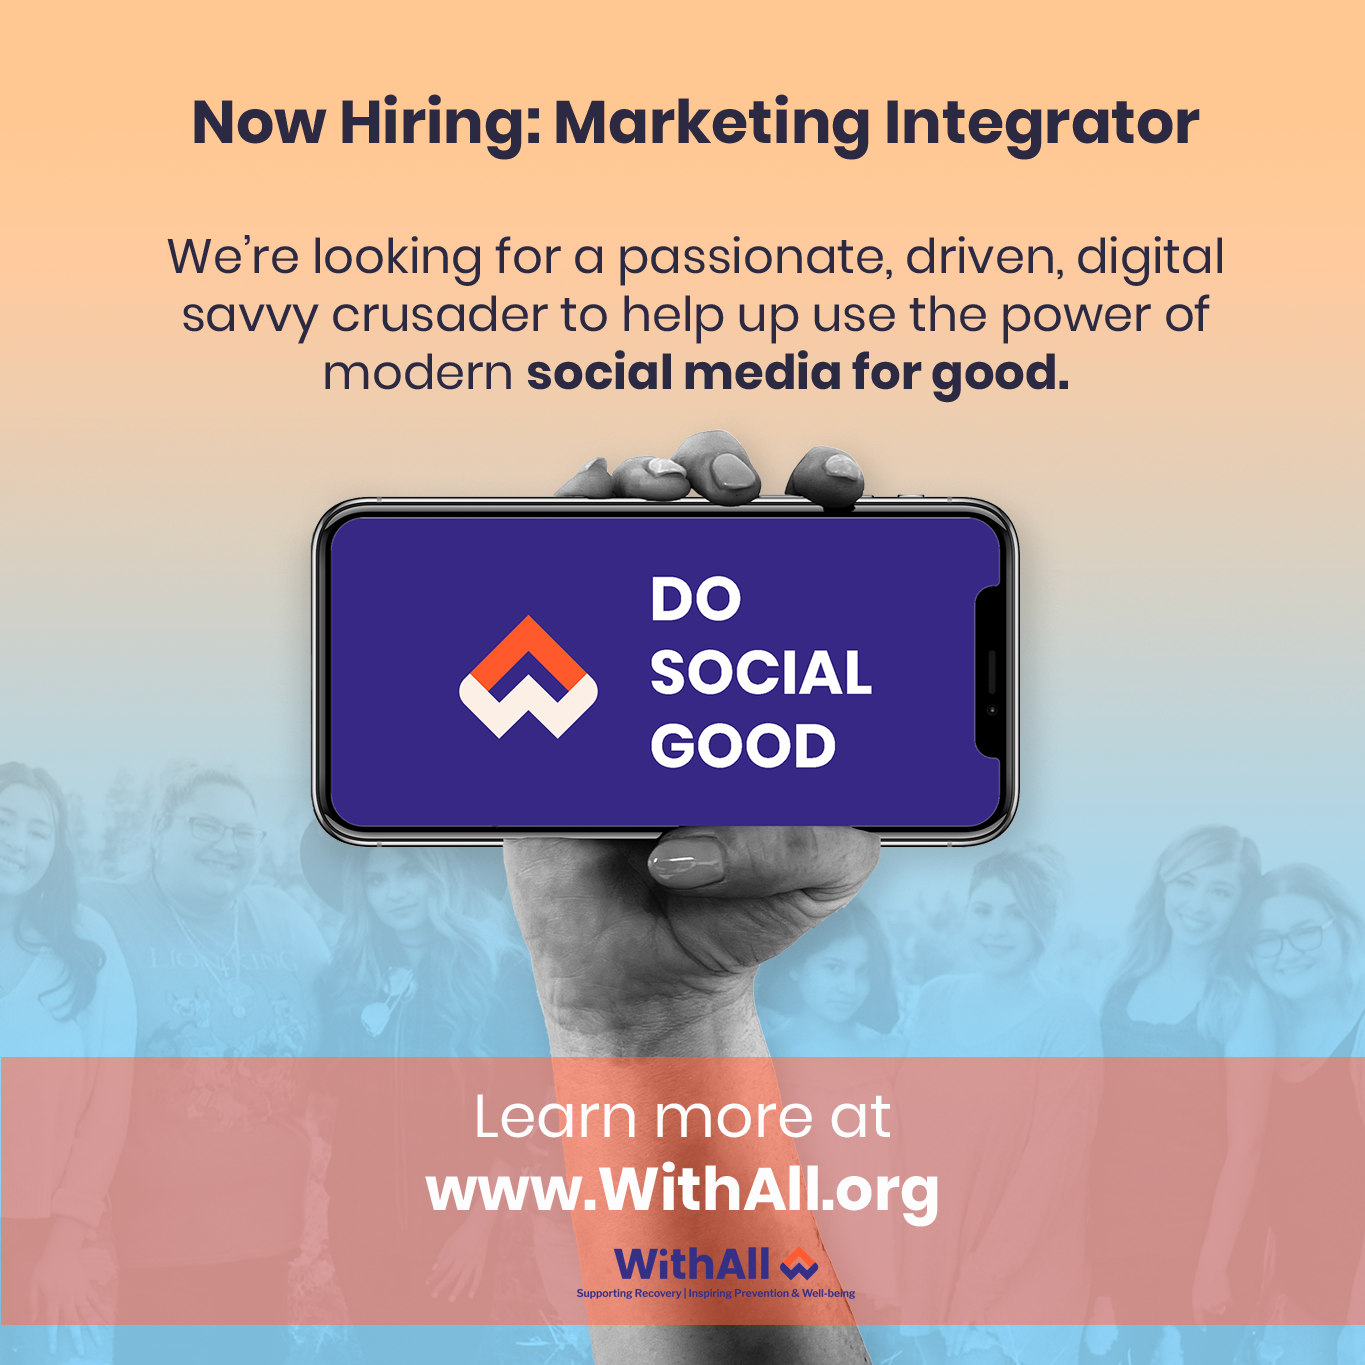 Now Hiring | Marketing Integrator at WithAll.org